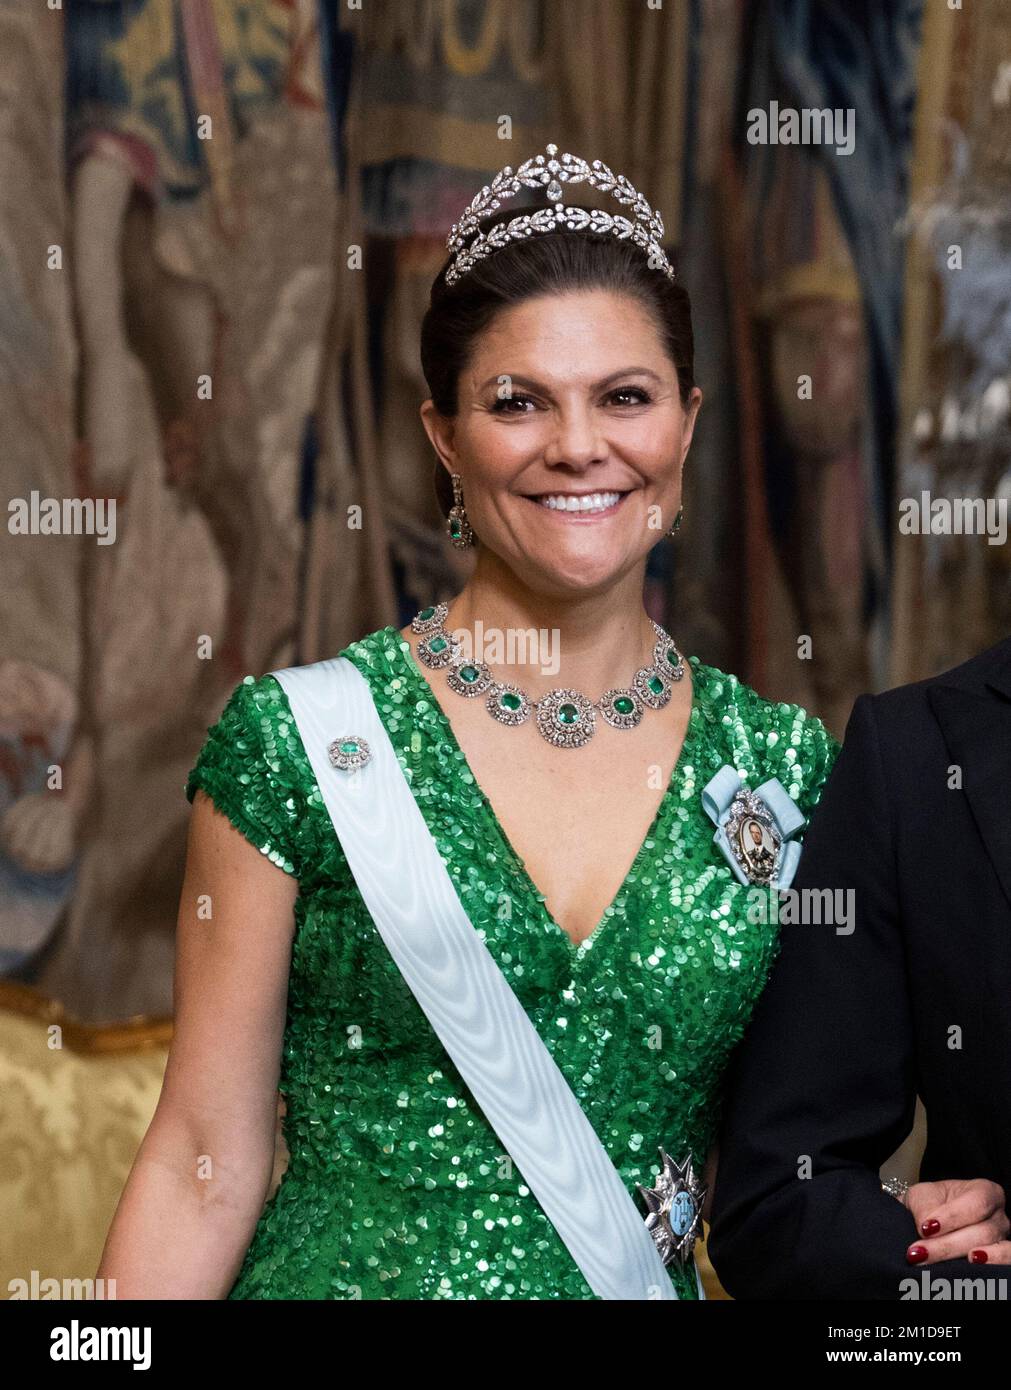 Crown Princess Victoria attends the King's dinner for the Nobel laureates at the Royal Palace in Stockholm, Sweden, 11 December 2022.  Photo: Pontus Lundahl / TT / 10050 Stock Photo